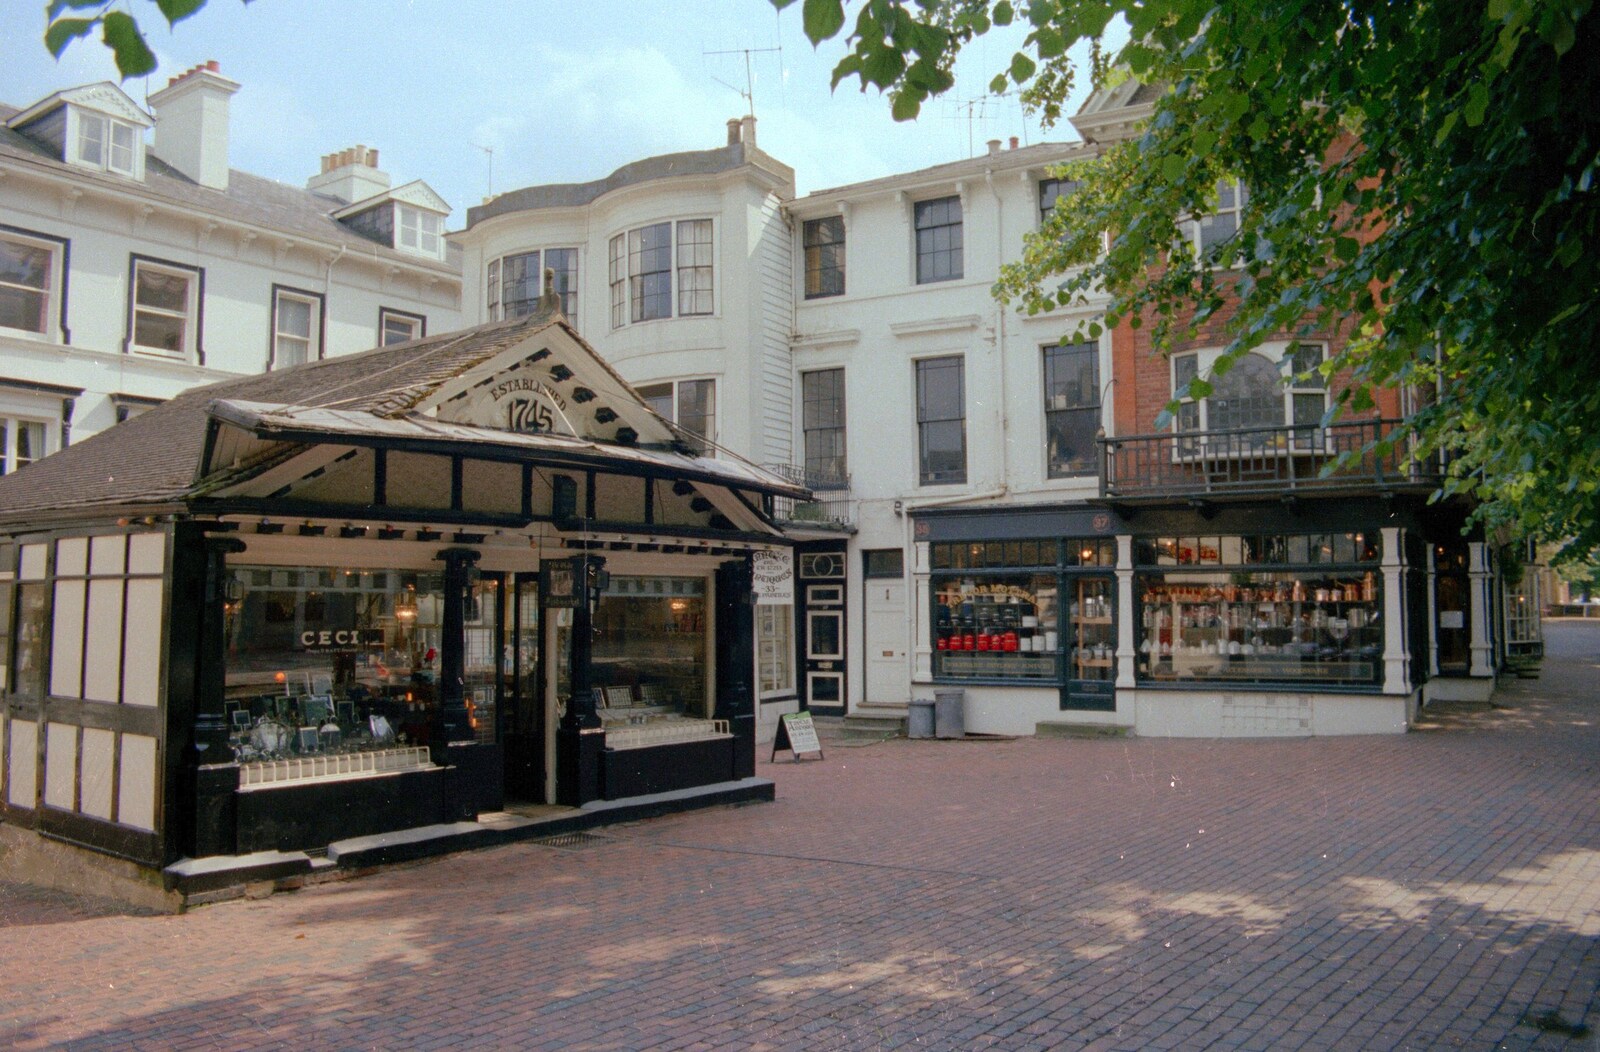 Shops in Tunbridge Wells from A Trip to Groombridge, Kent - 10th July 1986